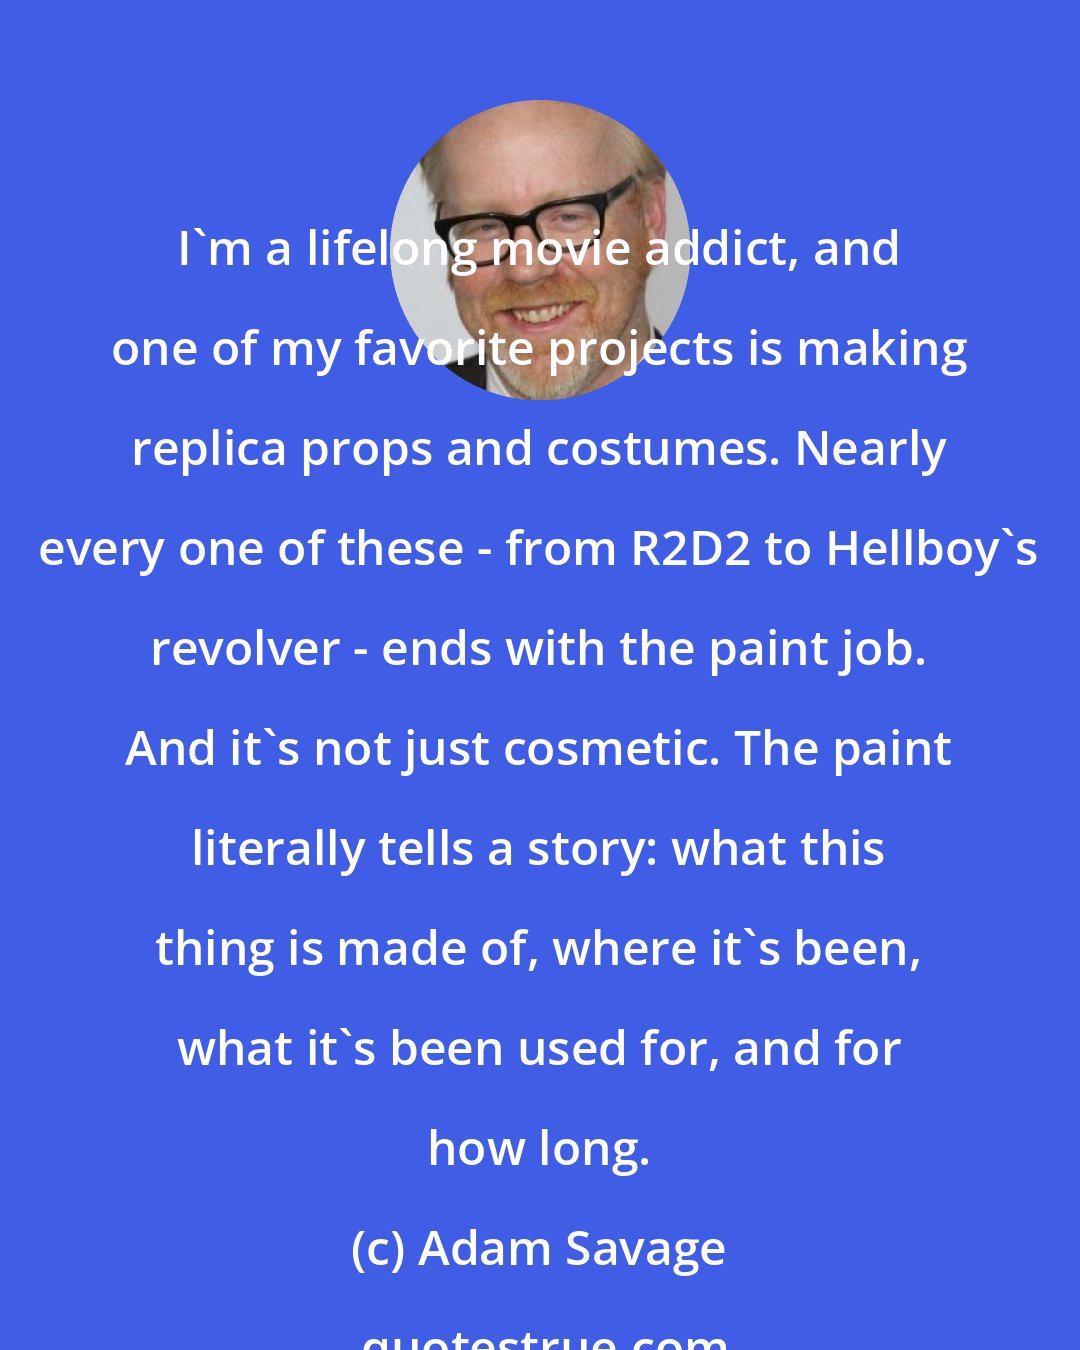 Adam Savage: I'm a lifelong movie addict, and one of my favorite projects is making replica props and costumes. Nearly every one of these - from R2D2 to Hellboy's revolver - ends with the paint job. And it's not just cosmetic. The paint literally tells a story: what this thing is made of, where it's been, what it's been used for, and for how long.